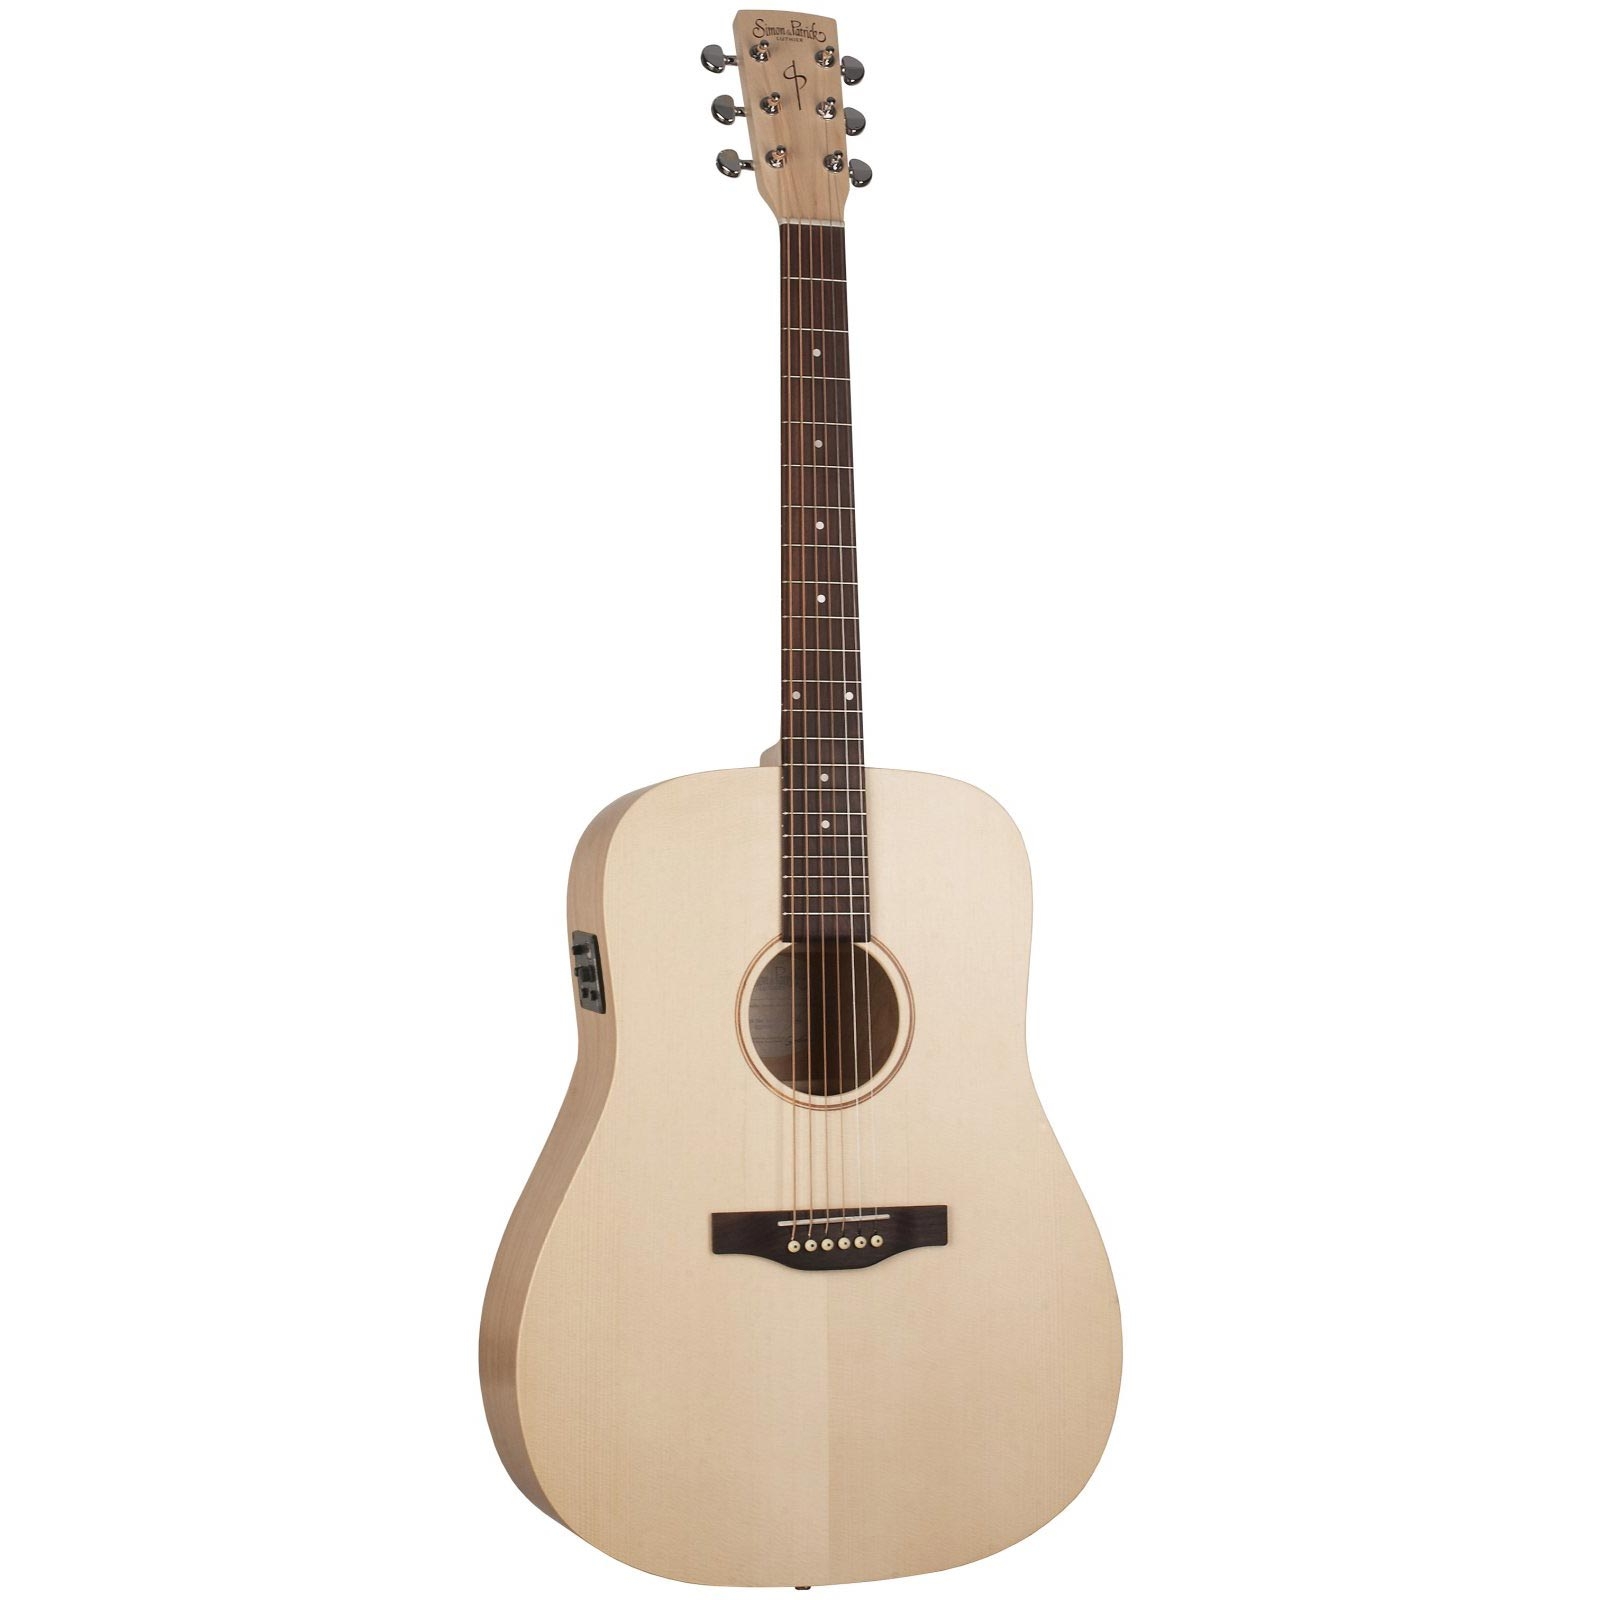 Simon & Patrick Trek Solid Spruce Natural Isyst Electric - Acoustic Guitar